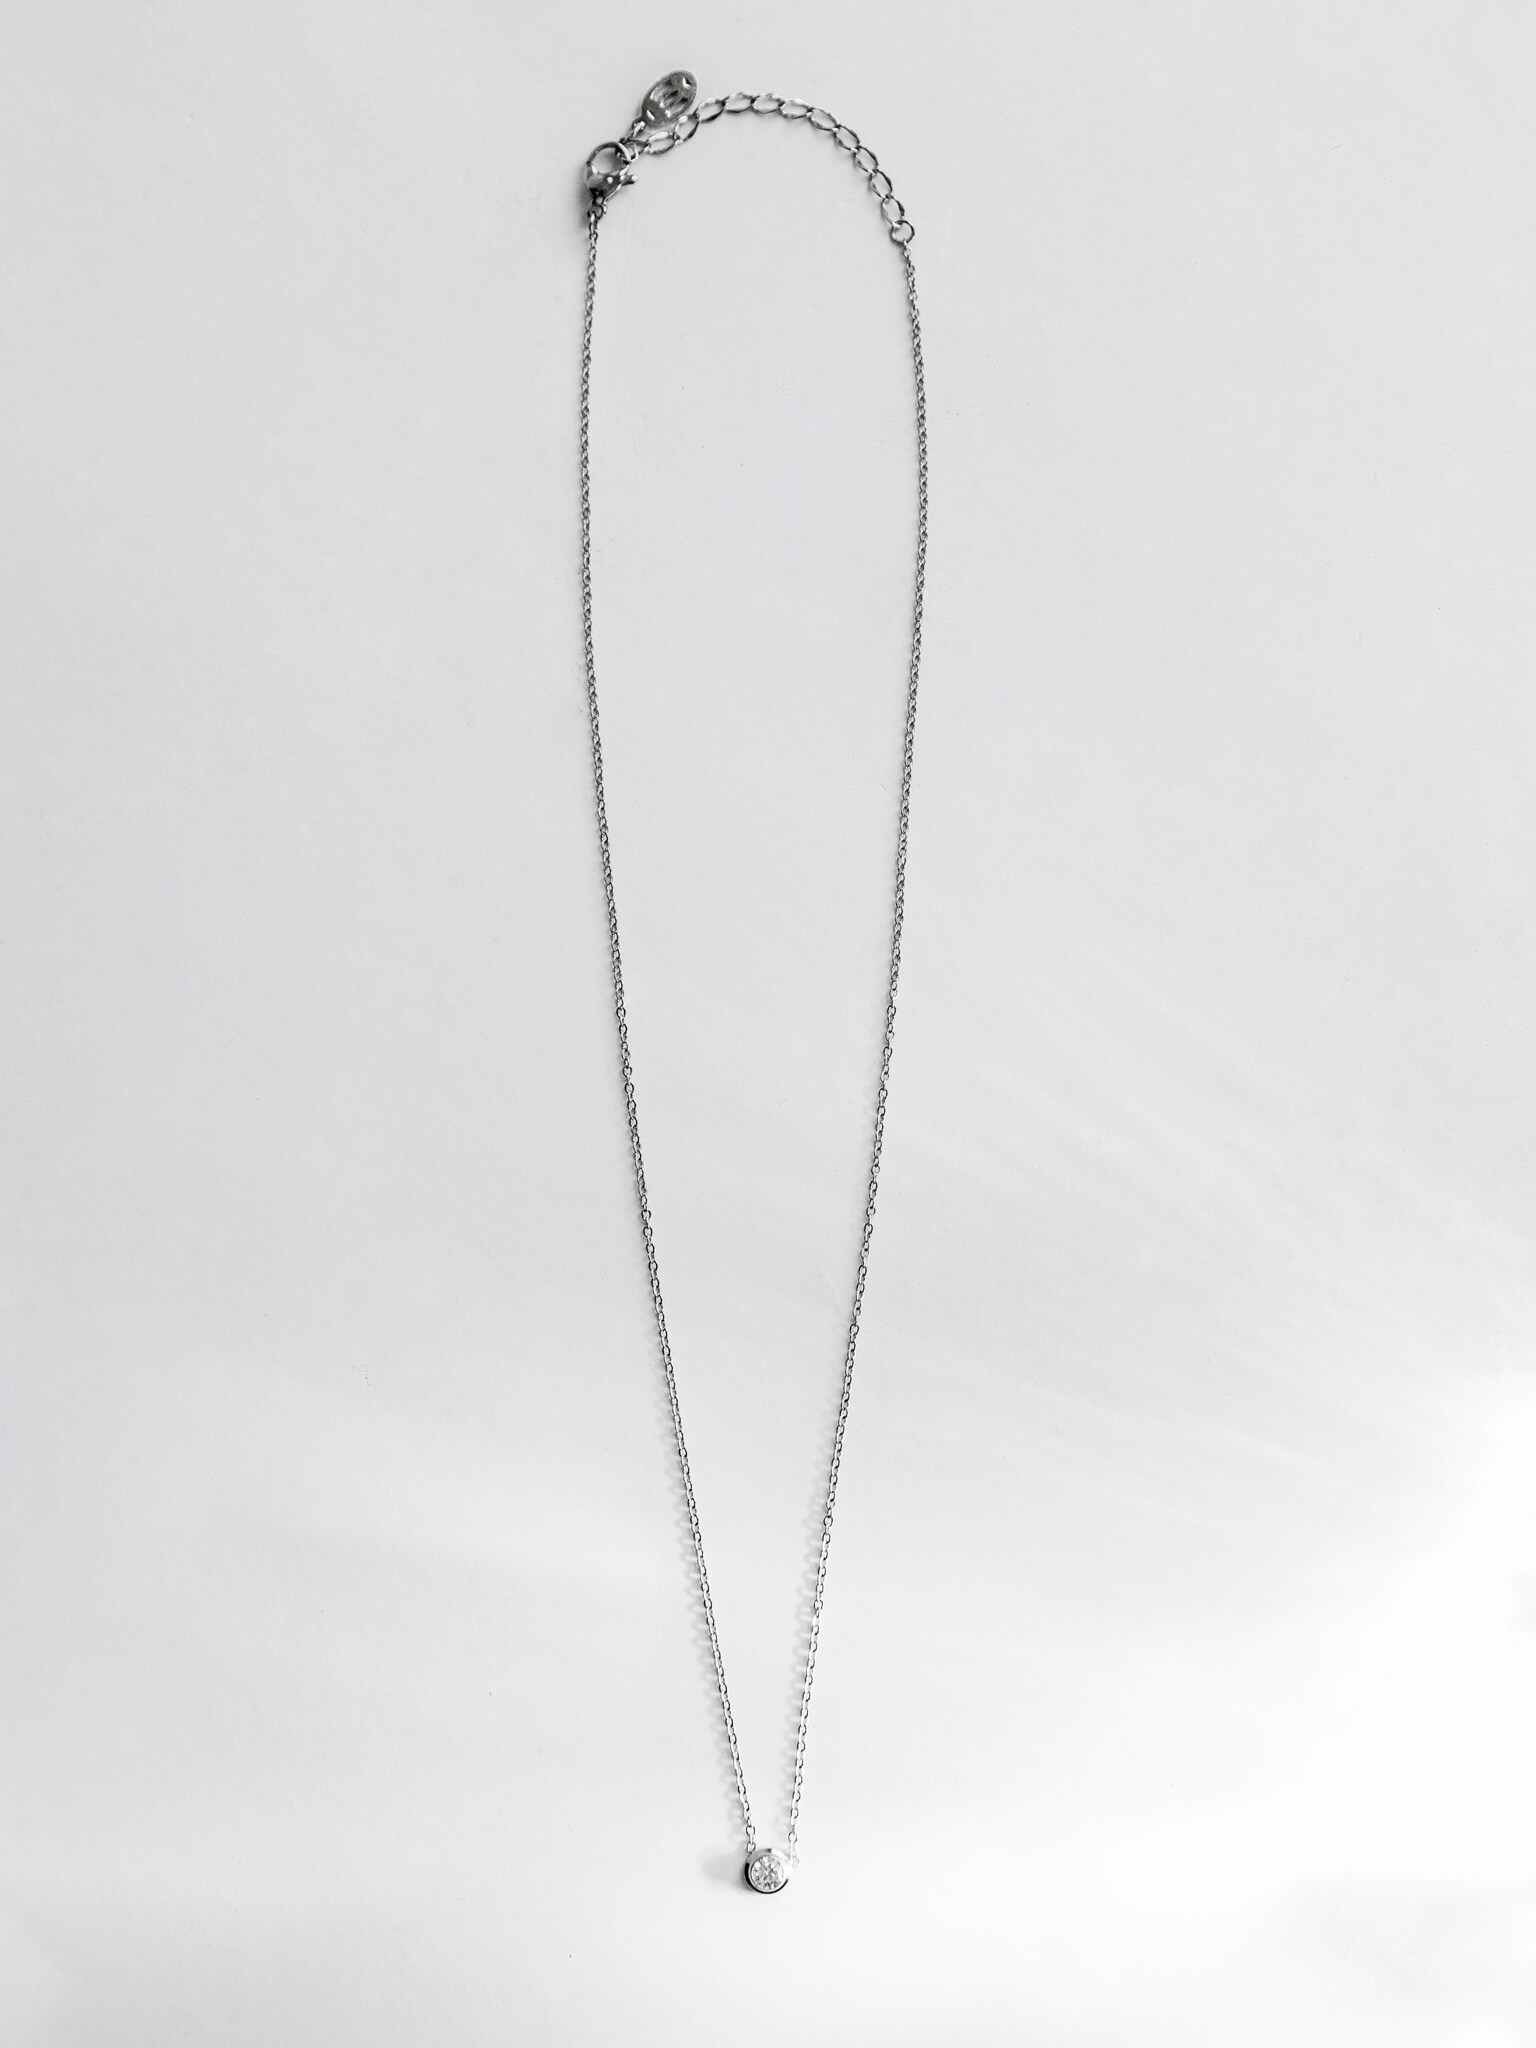 Dainty pendant chain necklace